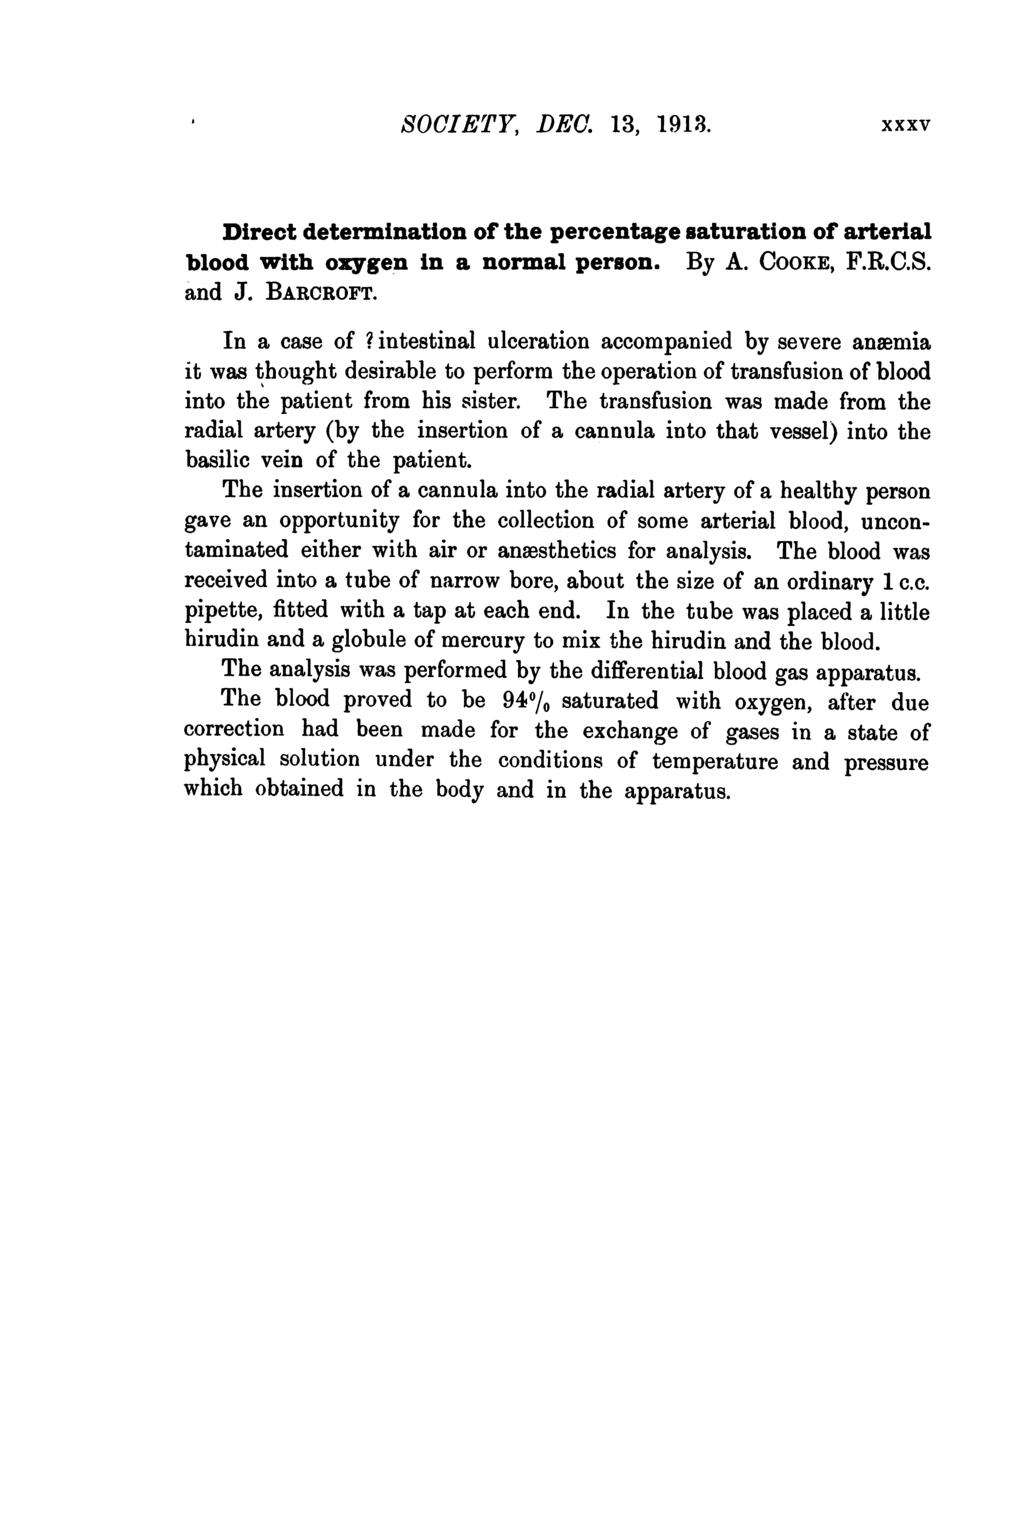 SOCIETY, DEC. 13, 1913. XXXV Direct determination of the percentage saturation of arterial blood with oxygen in a normal person. By A. COOKE, F.R.C.S. and J. BARCROFT. In a case of?